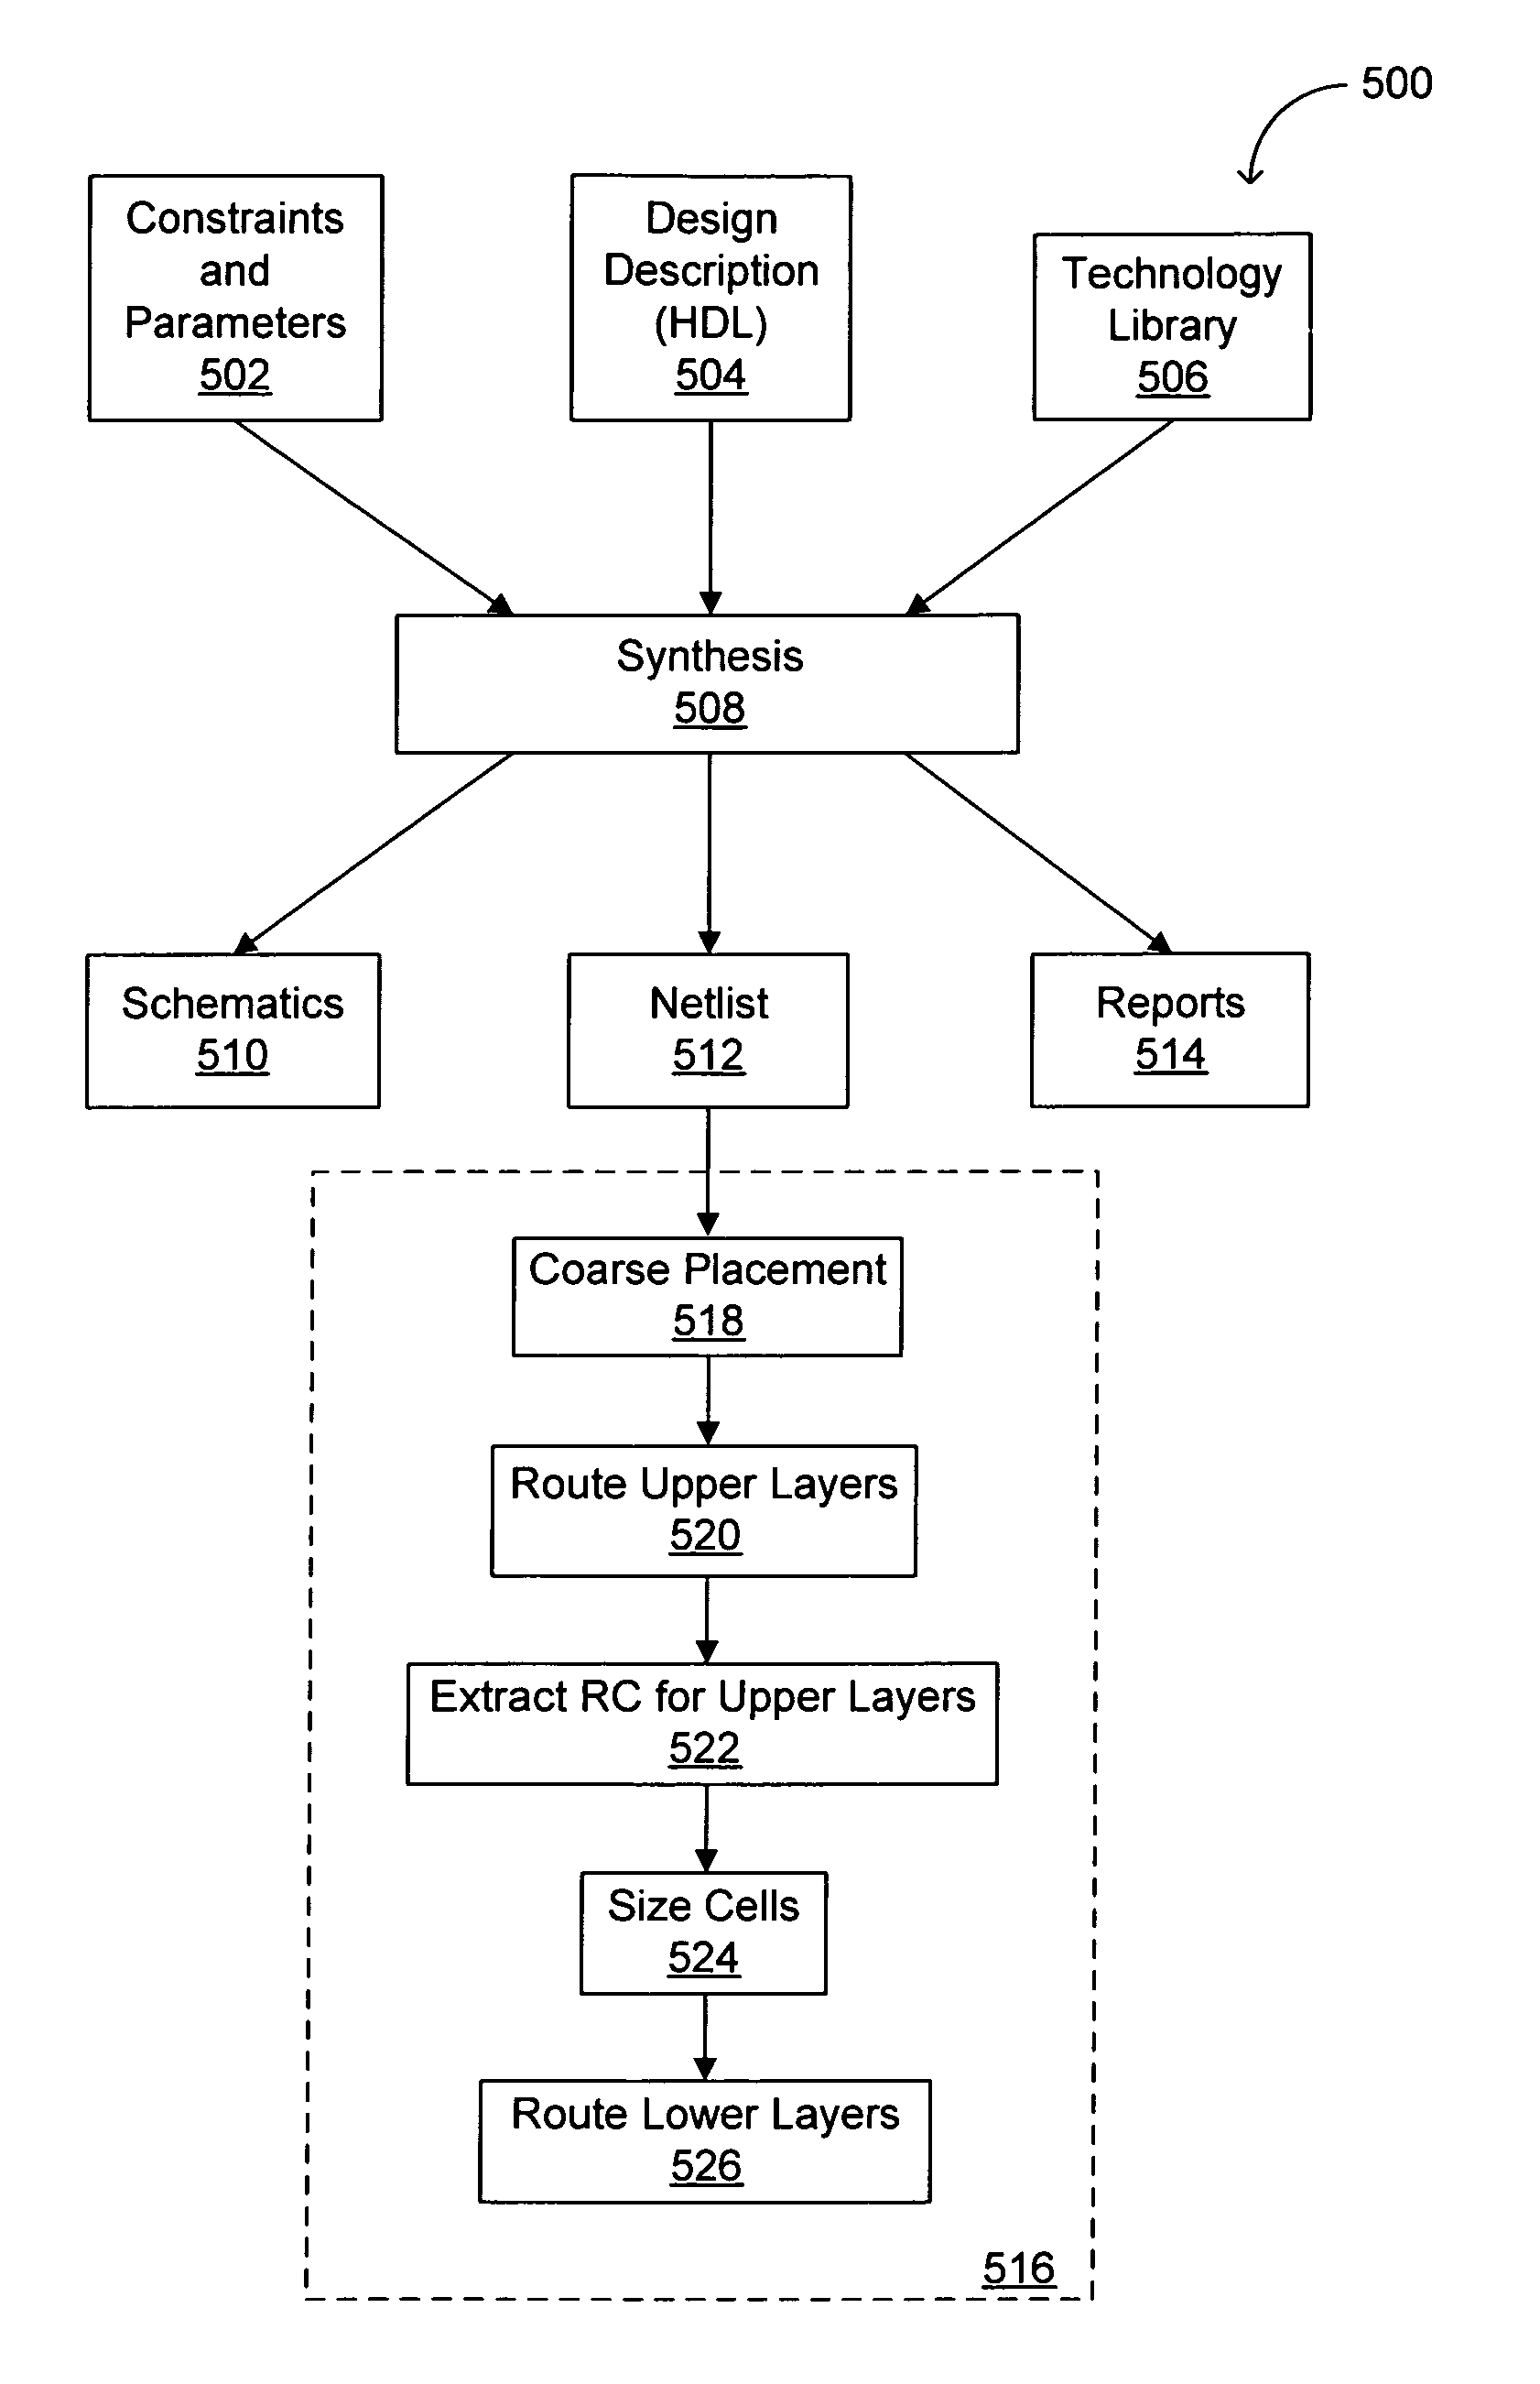 Method of placing and routing for power optimization and timing closure